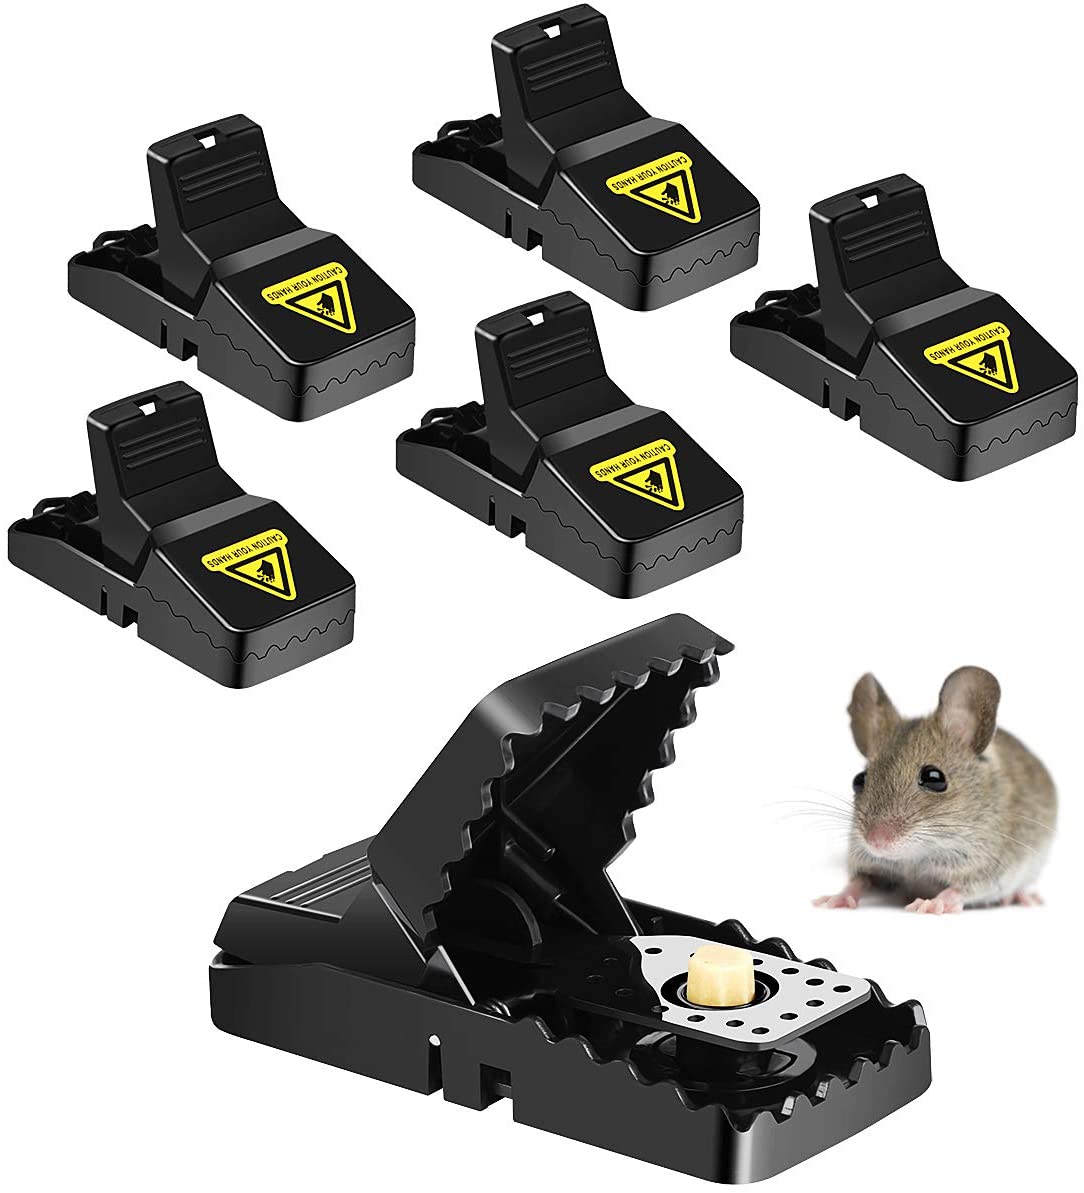 Ales Mouse Traps That Work, Reusable Snap Trap for Small